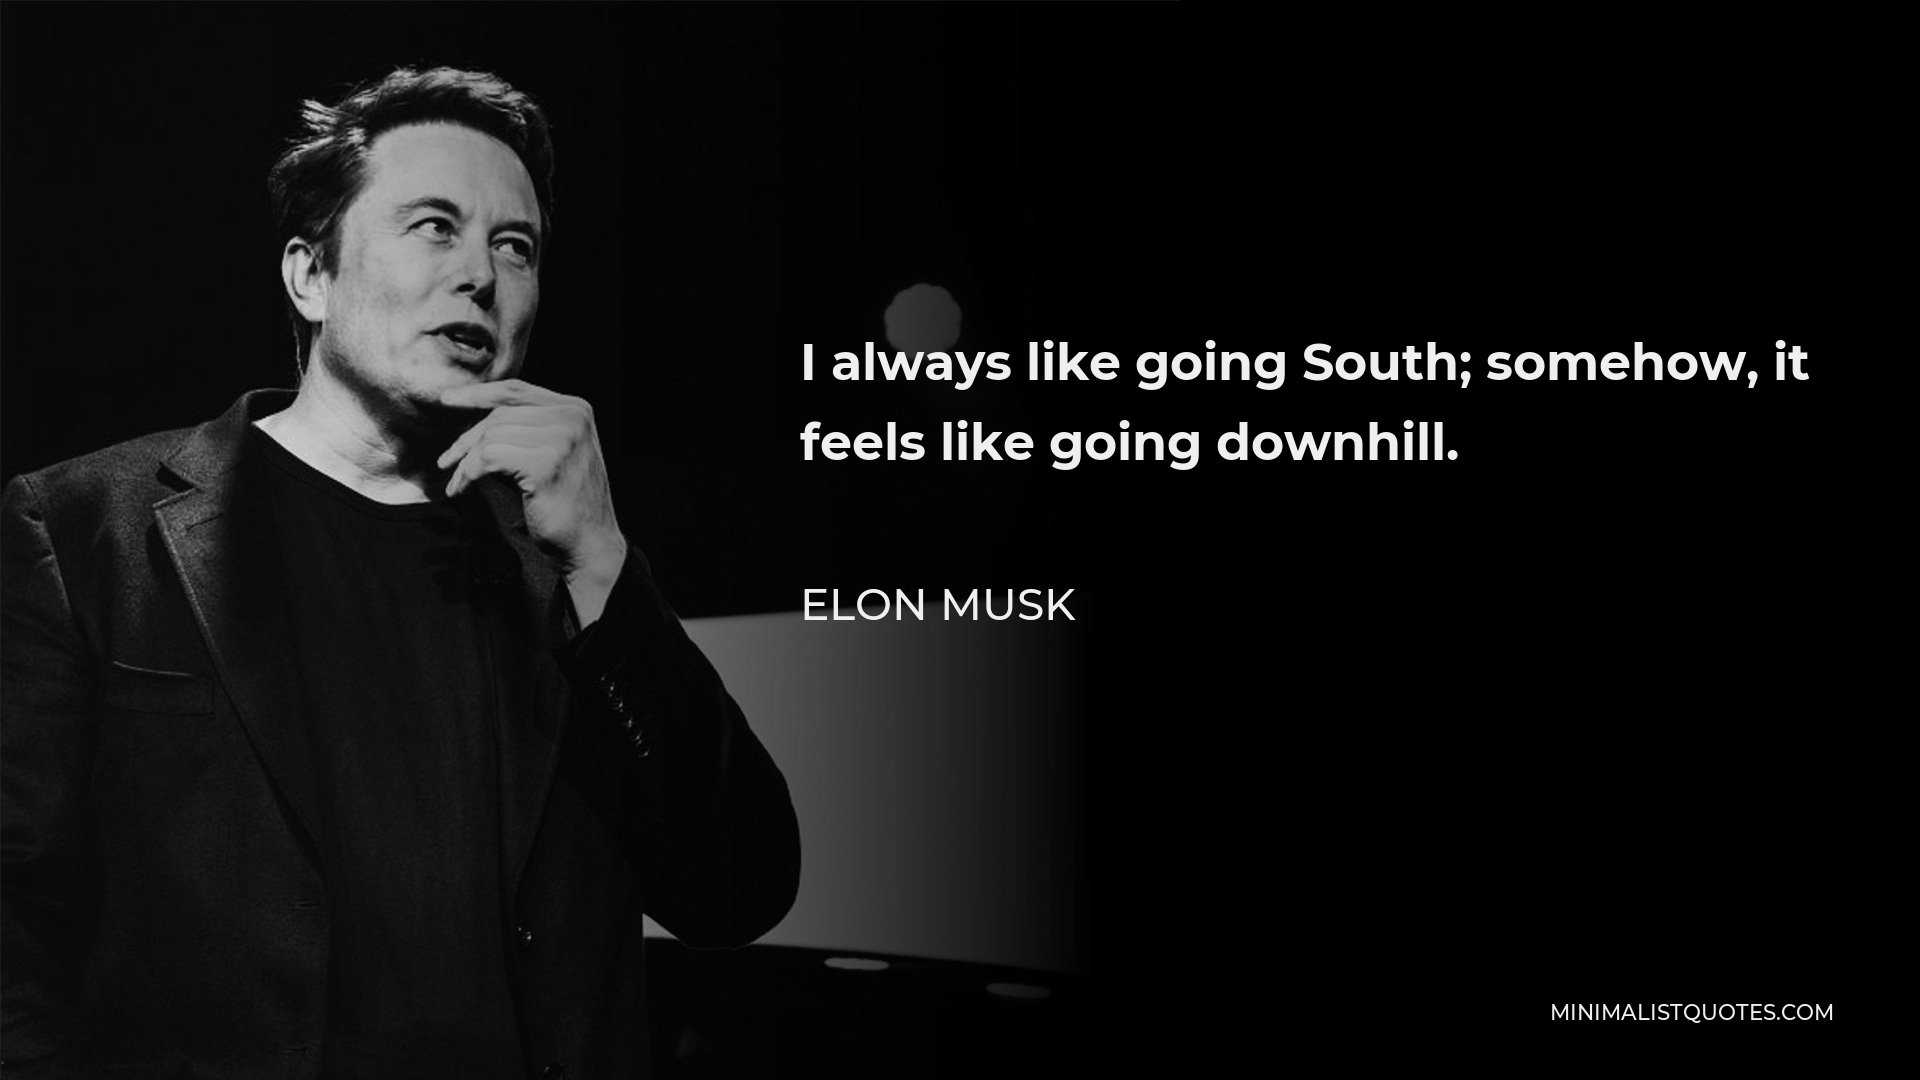 Elon Musk Quote - I always like going South; somehow, it feels like going downhill.